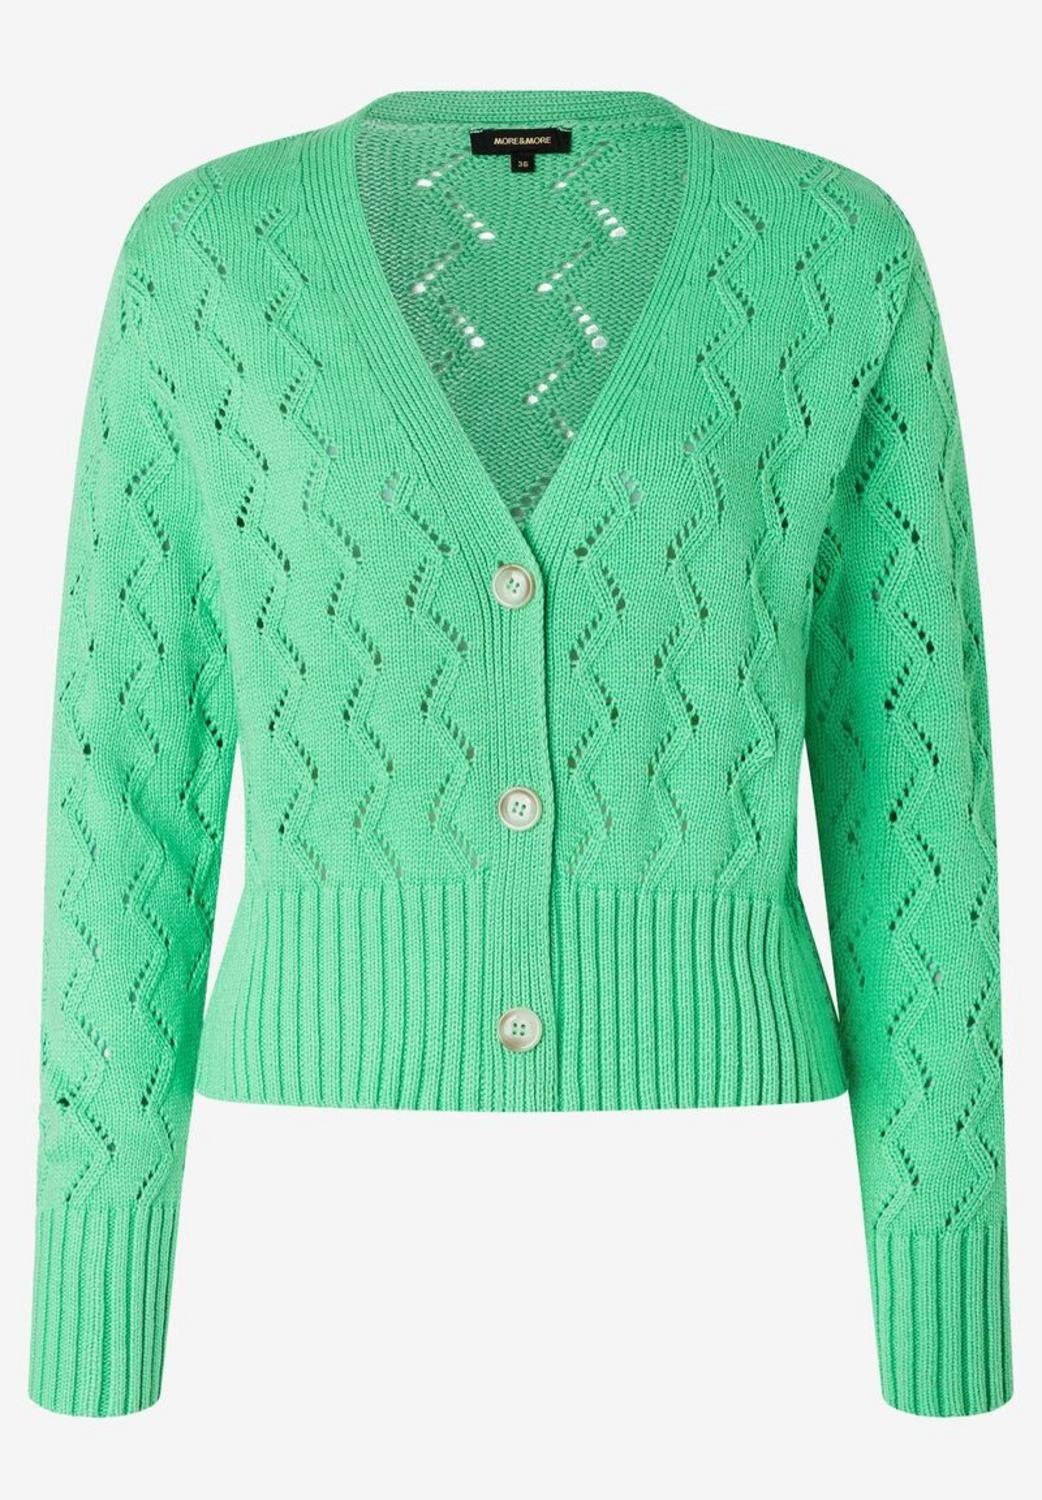 MORE&MORE Sweatshirt Cardigan with Structure, march green